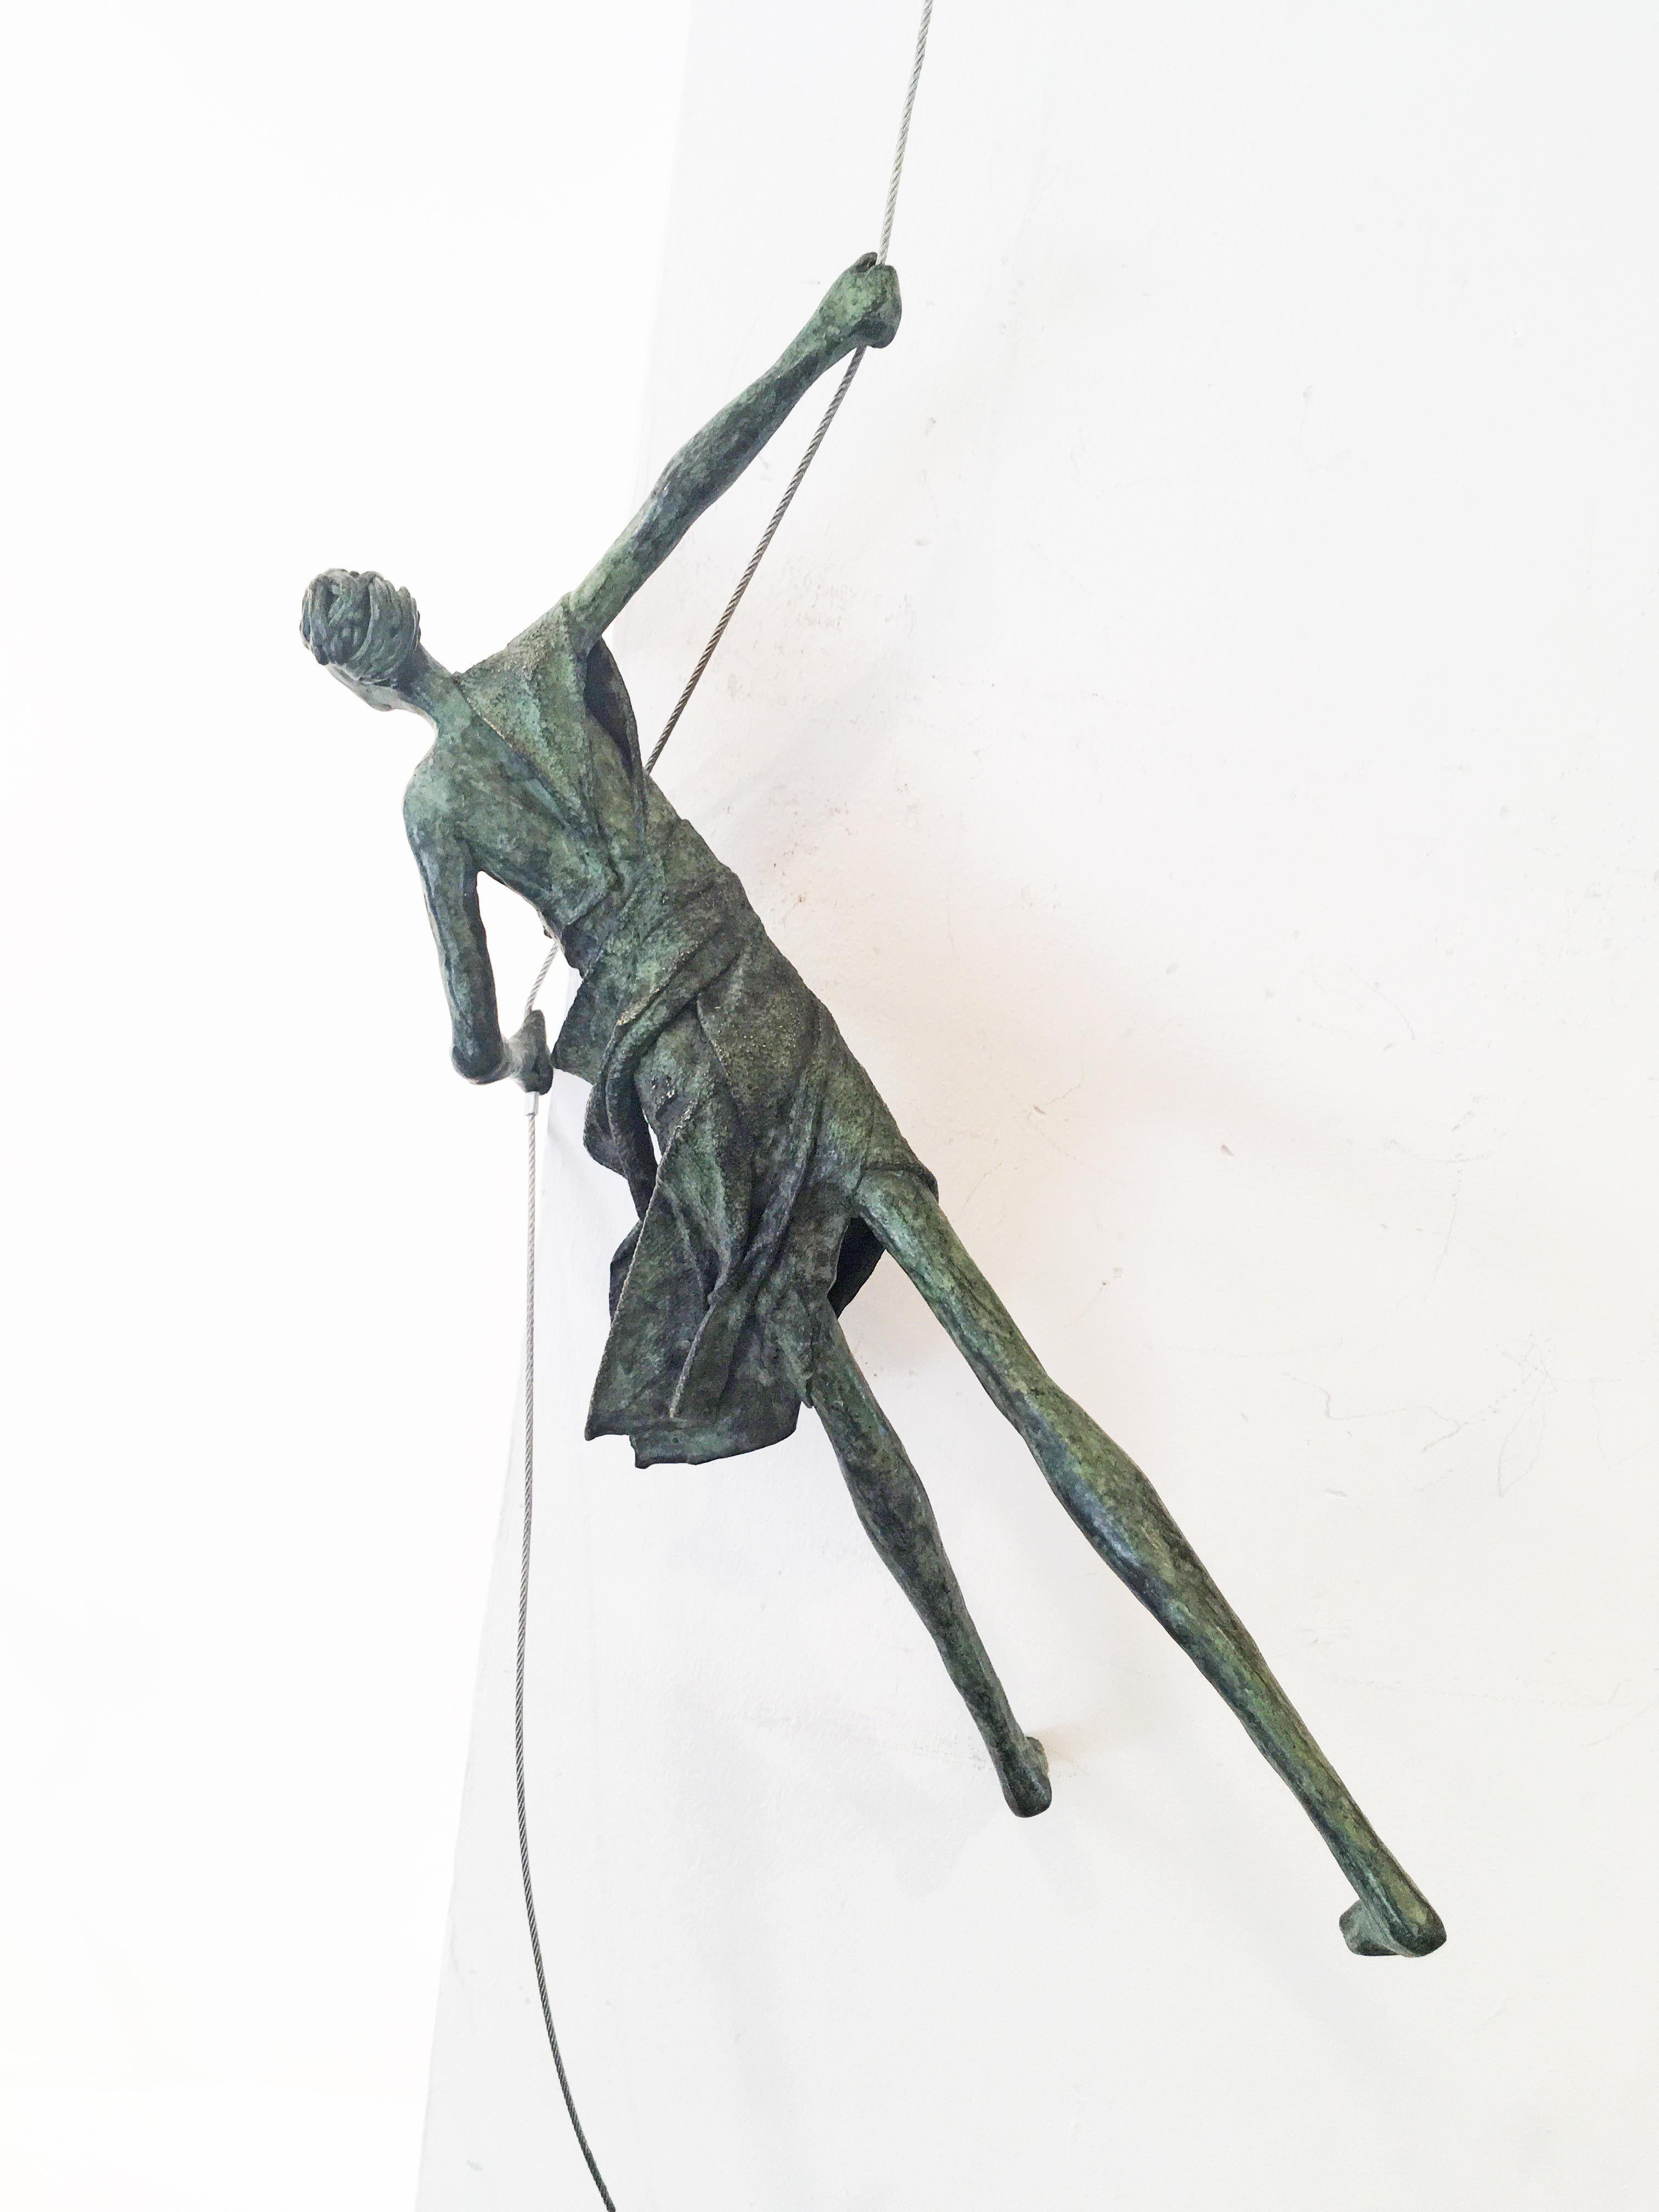 Acrobat - Legs on the wall (code 3409) - Sculpture by Anke Birnie